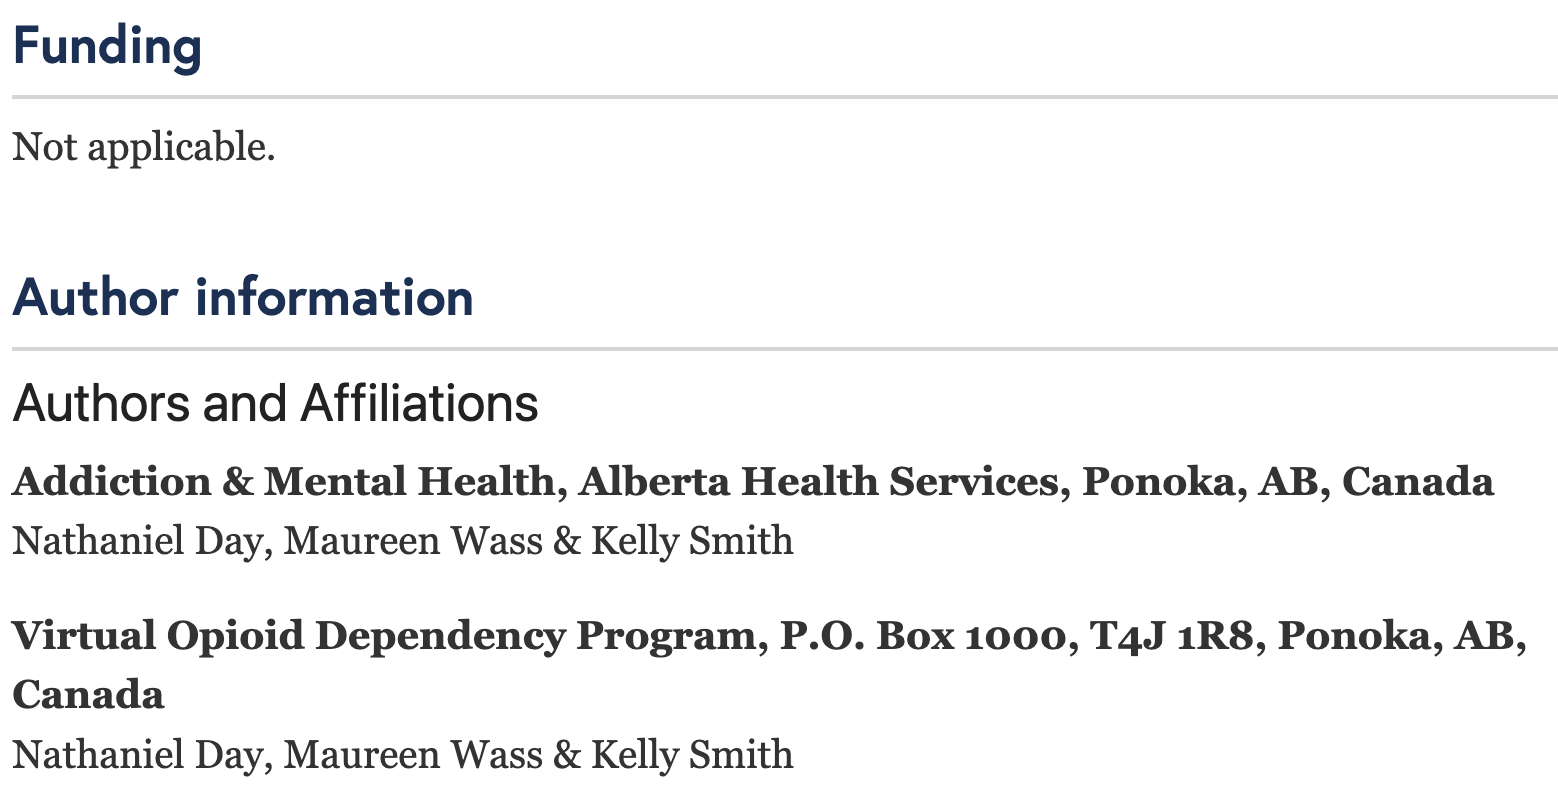 Funding Not applicable.  Author information Authors and Affiliations Addiction & Mental Health, Alberta Health Services, Ponoka, AB, Canada  Nathaniel Day, Maureen Wass & Kelly Smith  Virtual Opioid Dependency Program, P.O. Box 1000, T4J 1R8, Ponoka, AB, Canada  Nathaniel Day, Maureen Wass & Kelly Smith